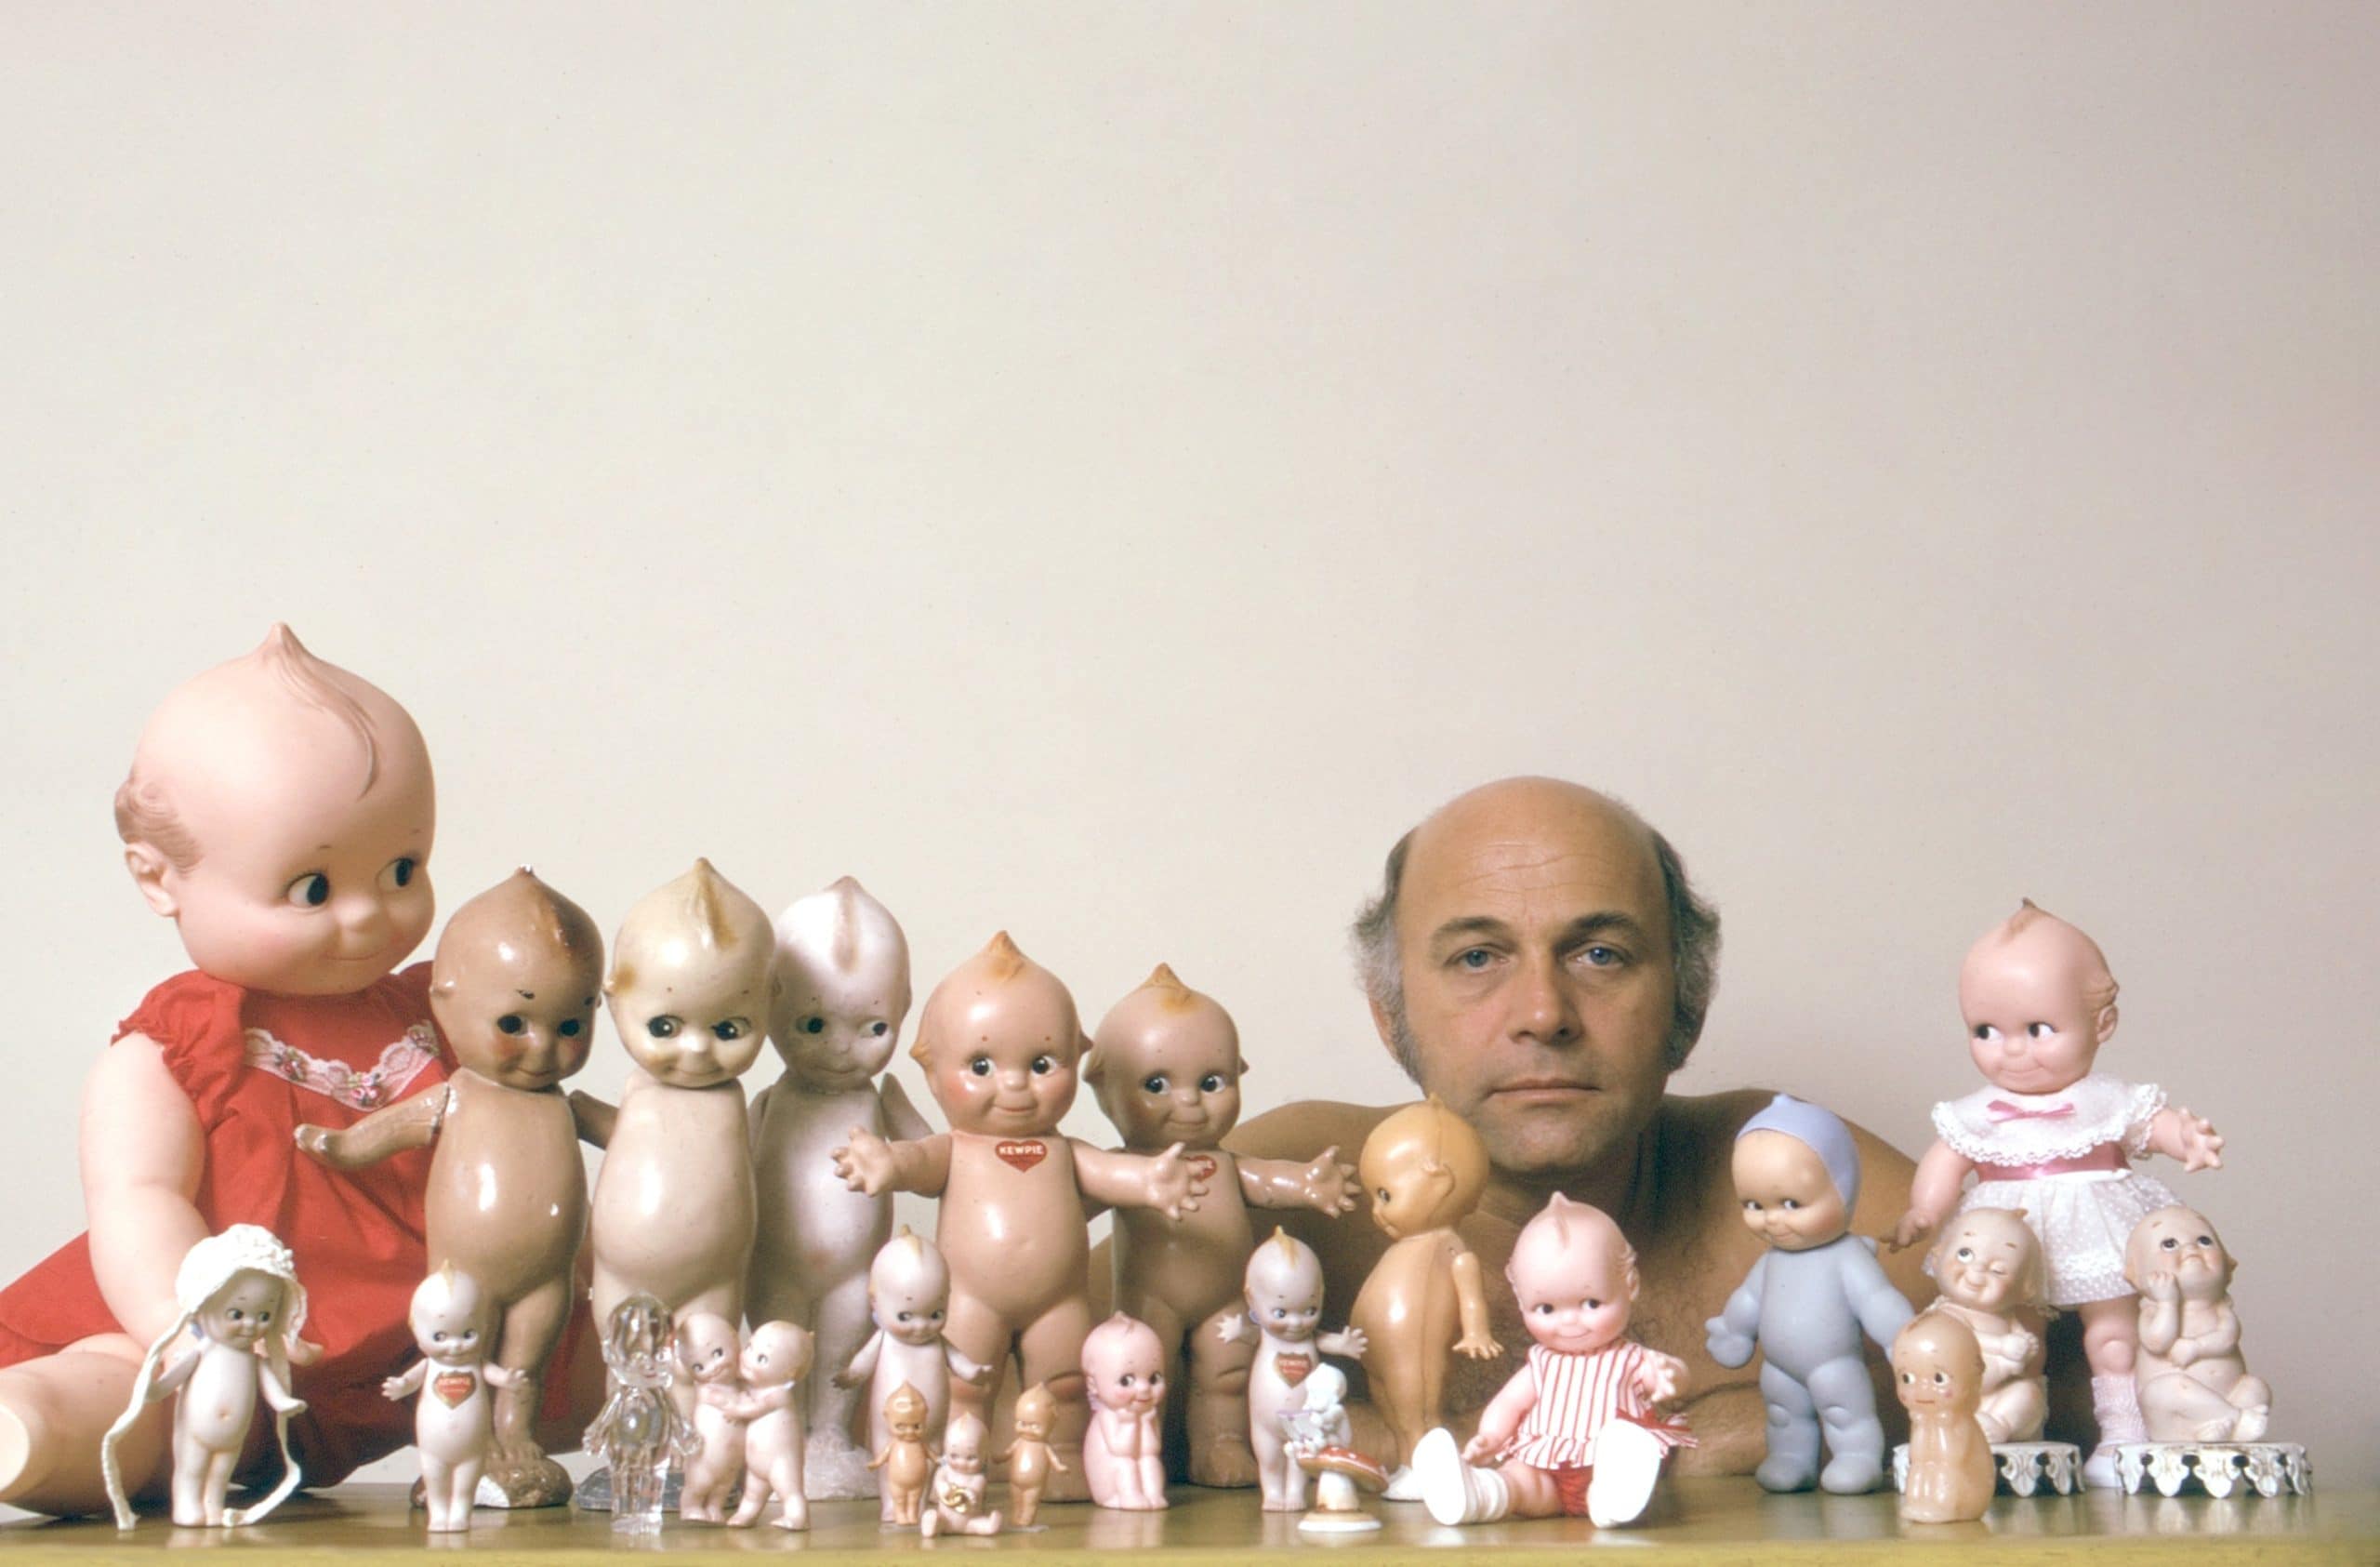 Gavin MacLeod posing with a collection of Kewpie Dolls